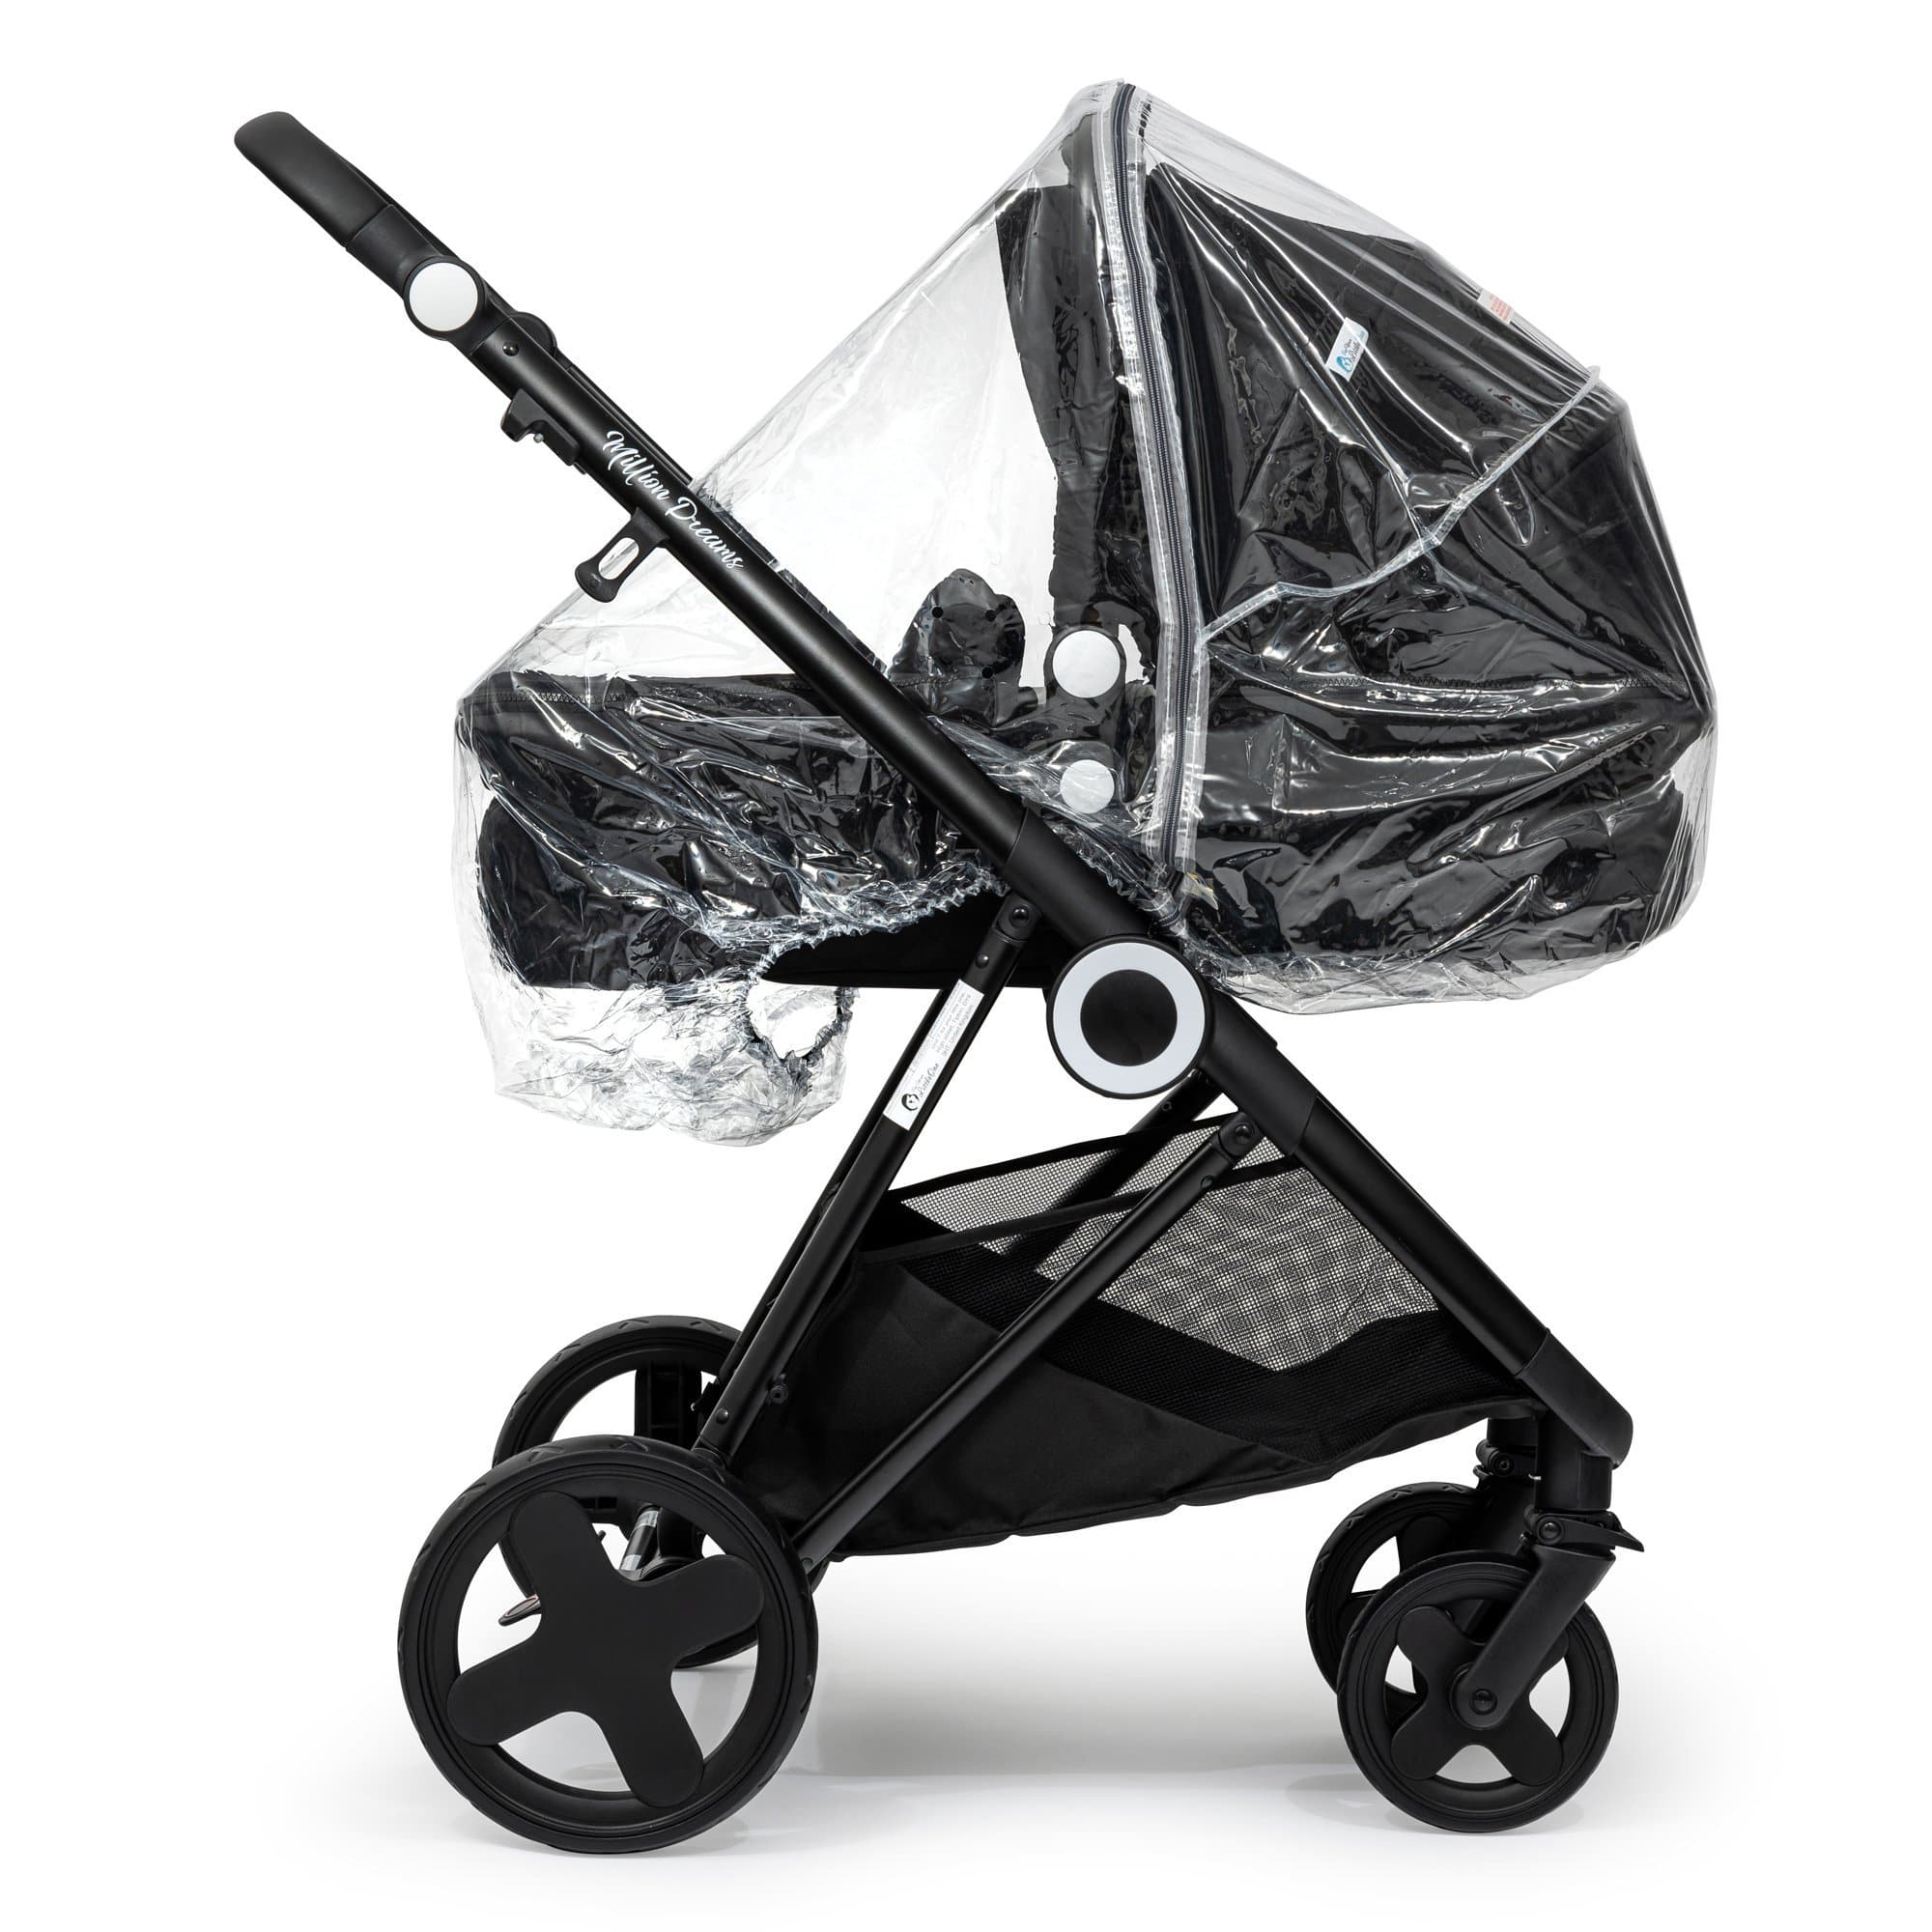 2 in 1 Rain Cover Compatible with Greentom - Fits All Models - For Your Little One